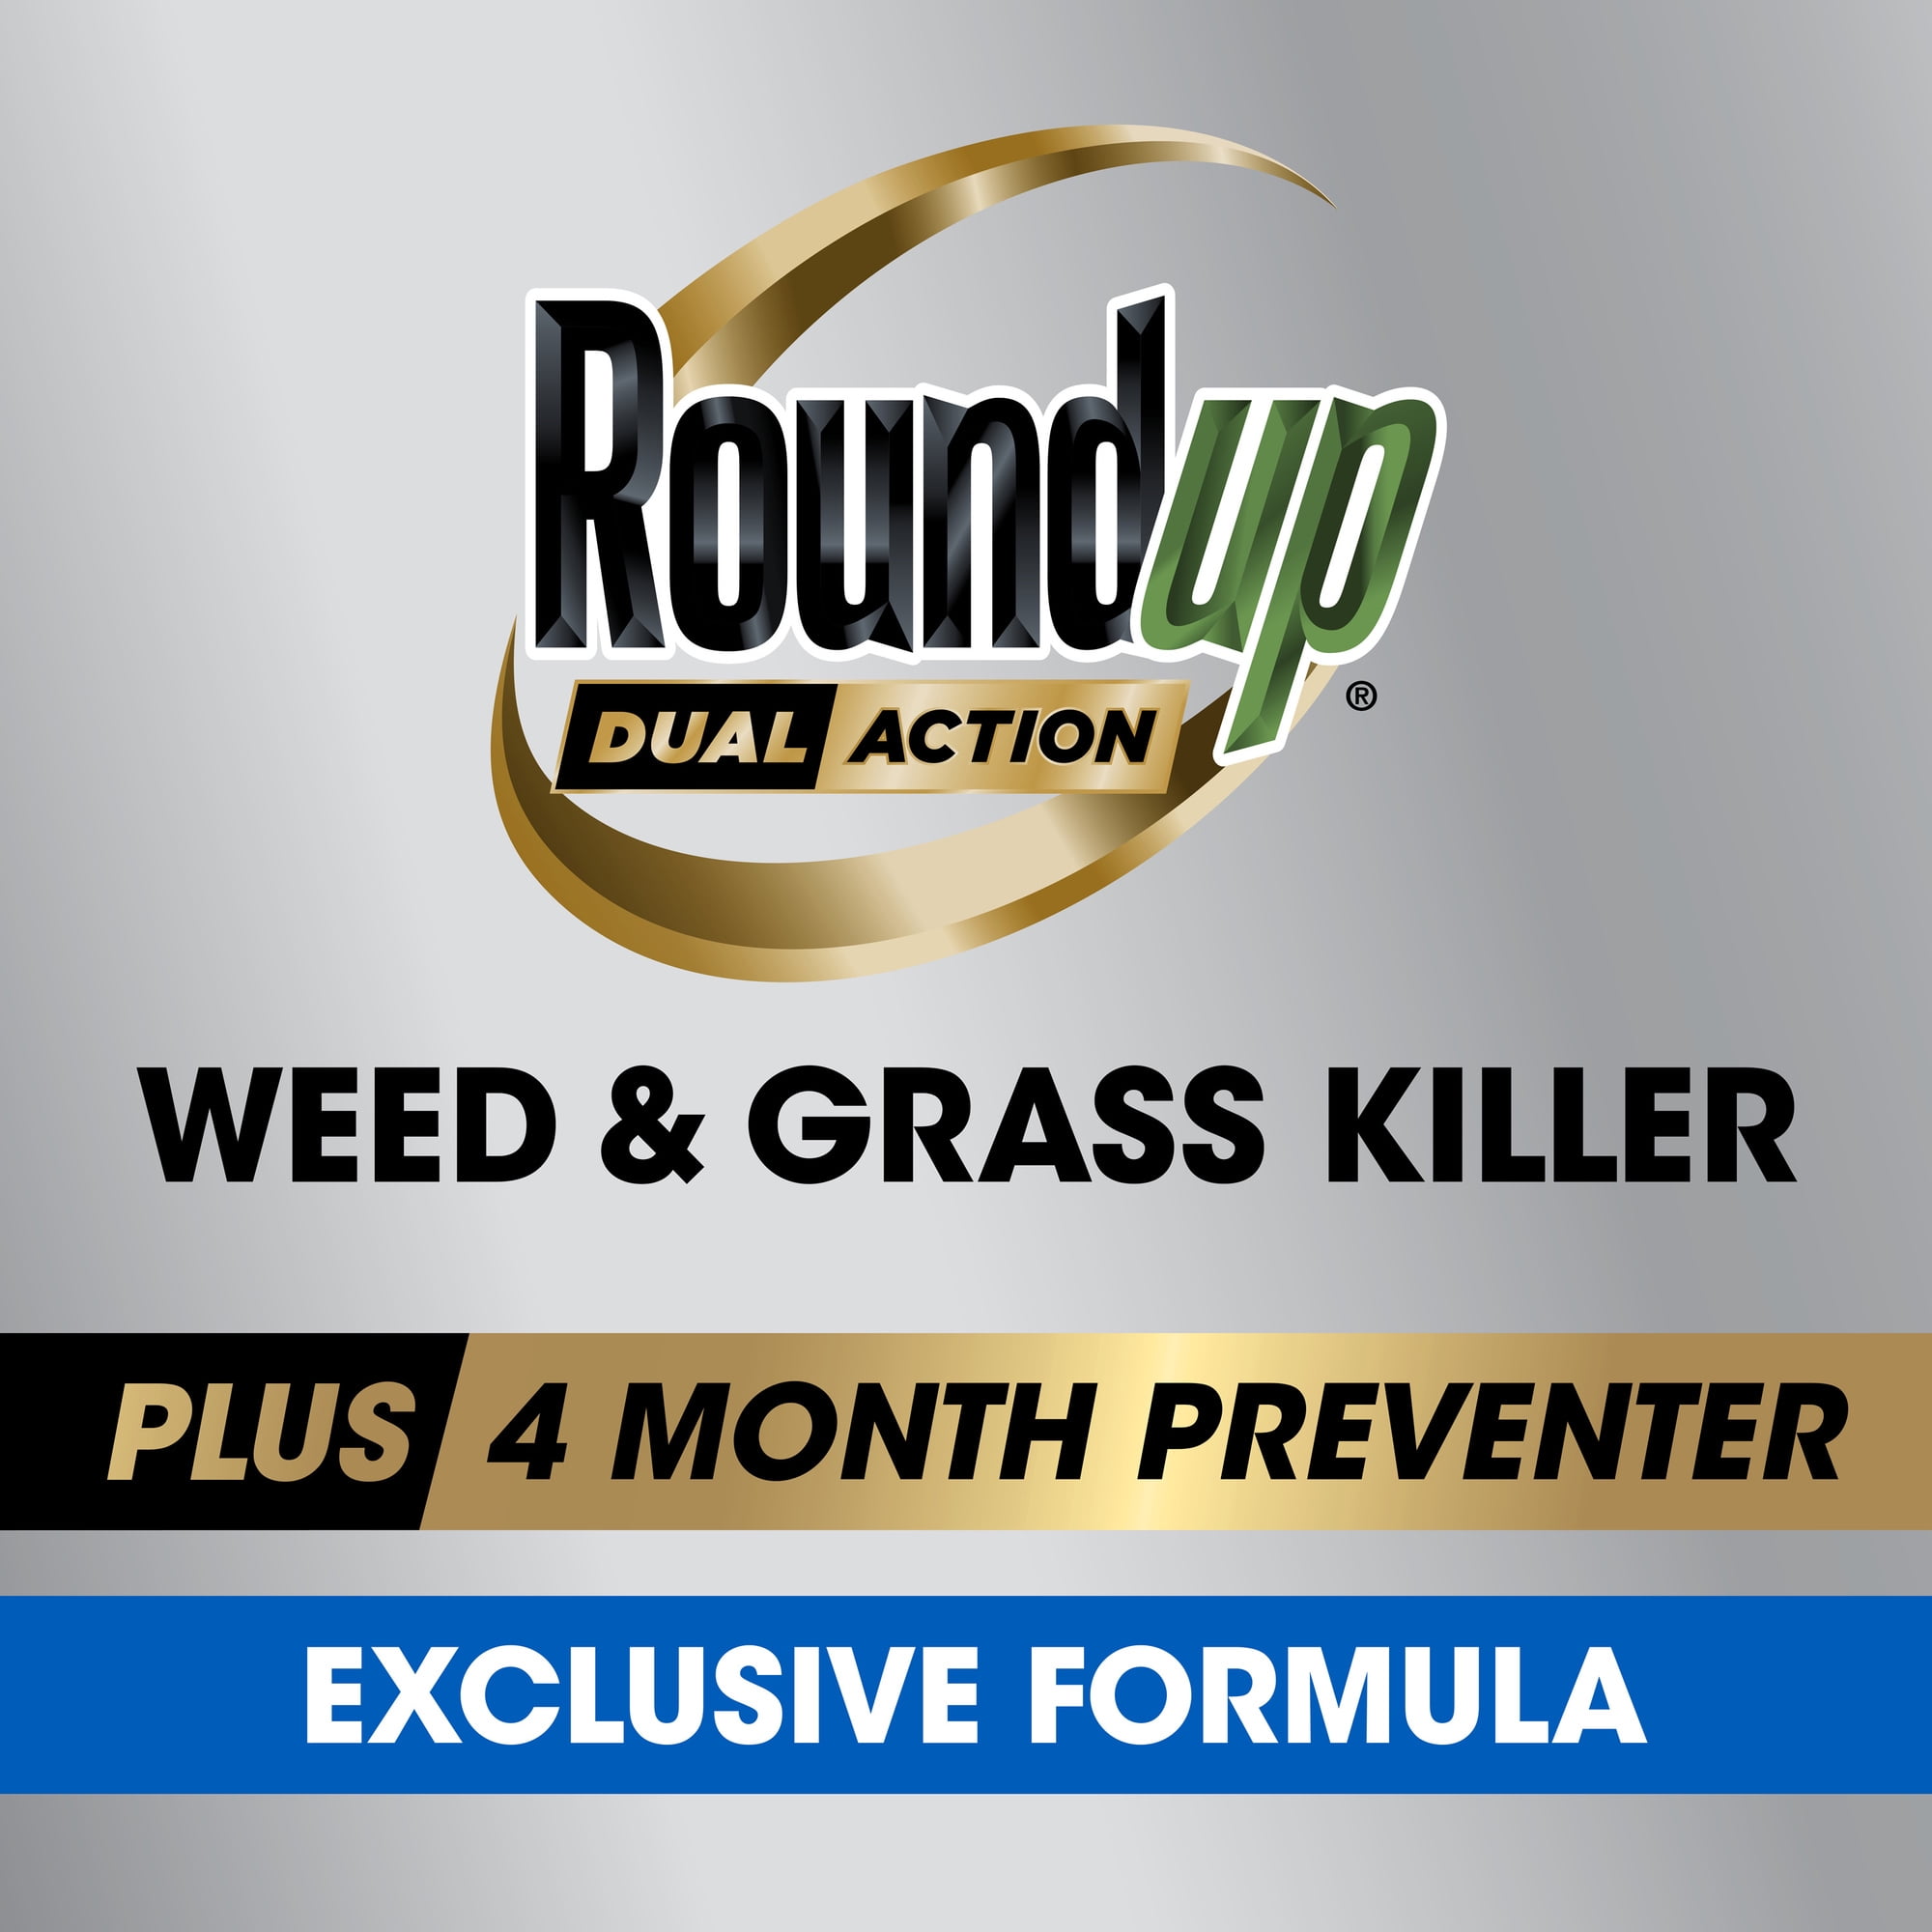 Roundup Dual Action Weed & Grass Killer Plus 4 Month Preventer, 1 gal. - 2